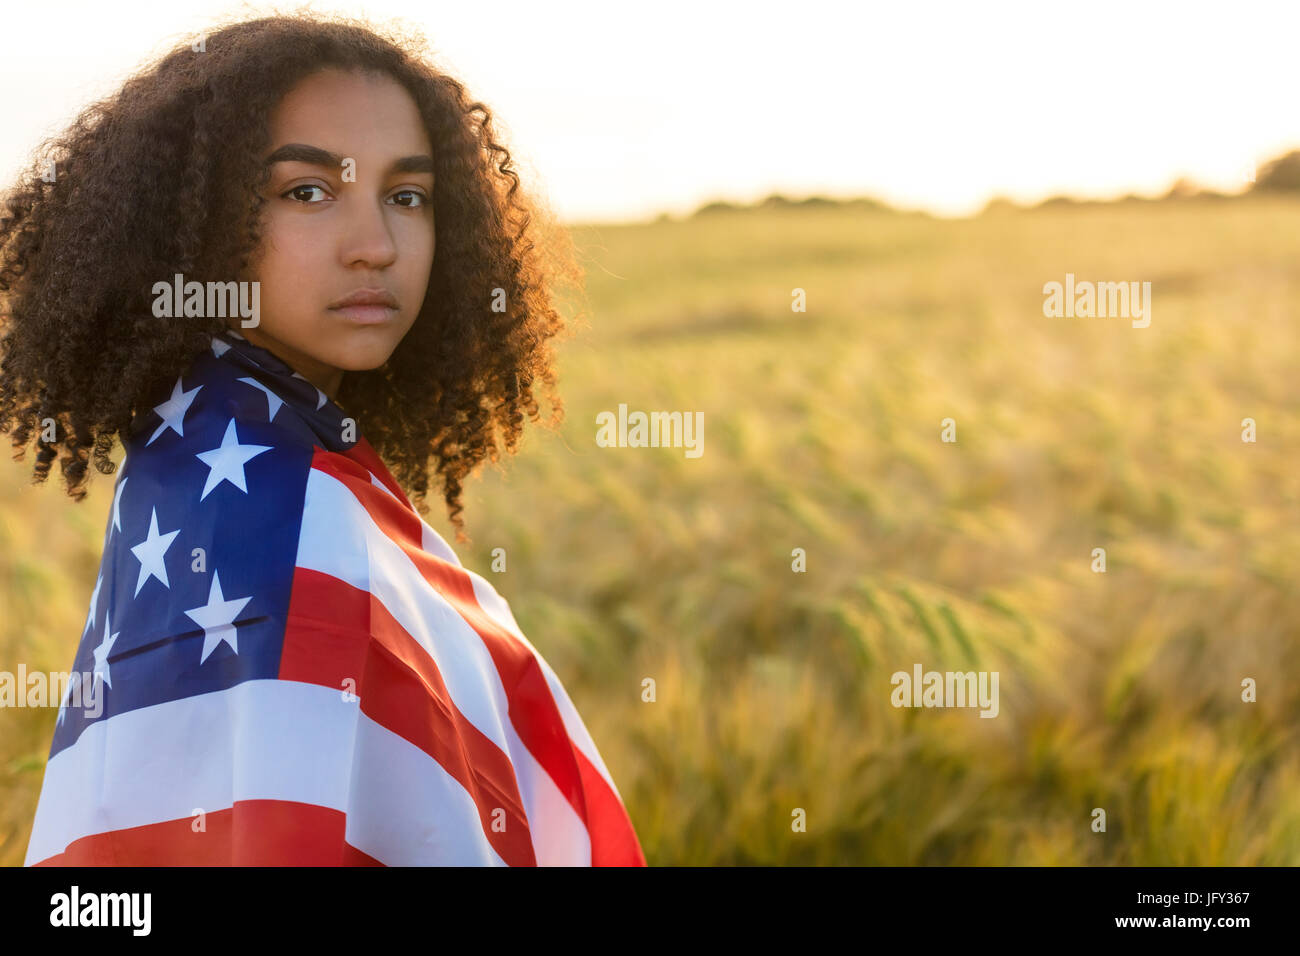 Sad depressed mixed race African American girl teenager female young woman with tears in her eyes in a field of wheat or barley crops holding and wrap Stock Photo